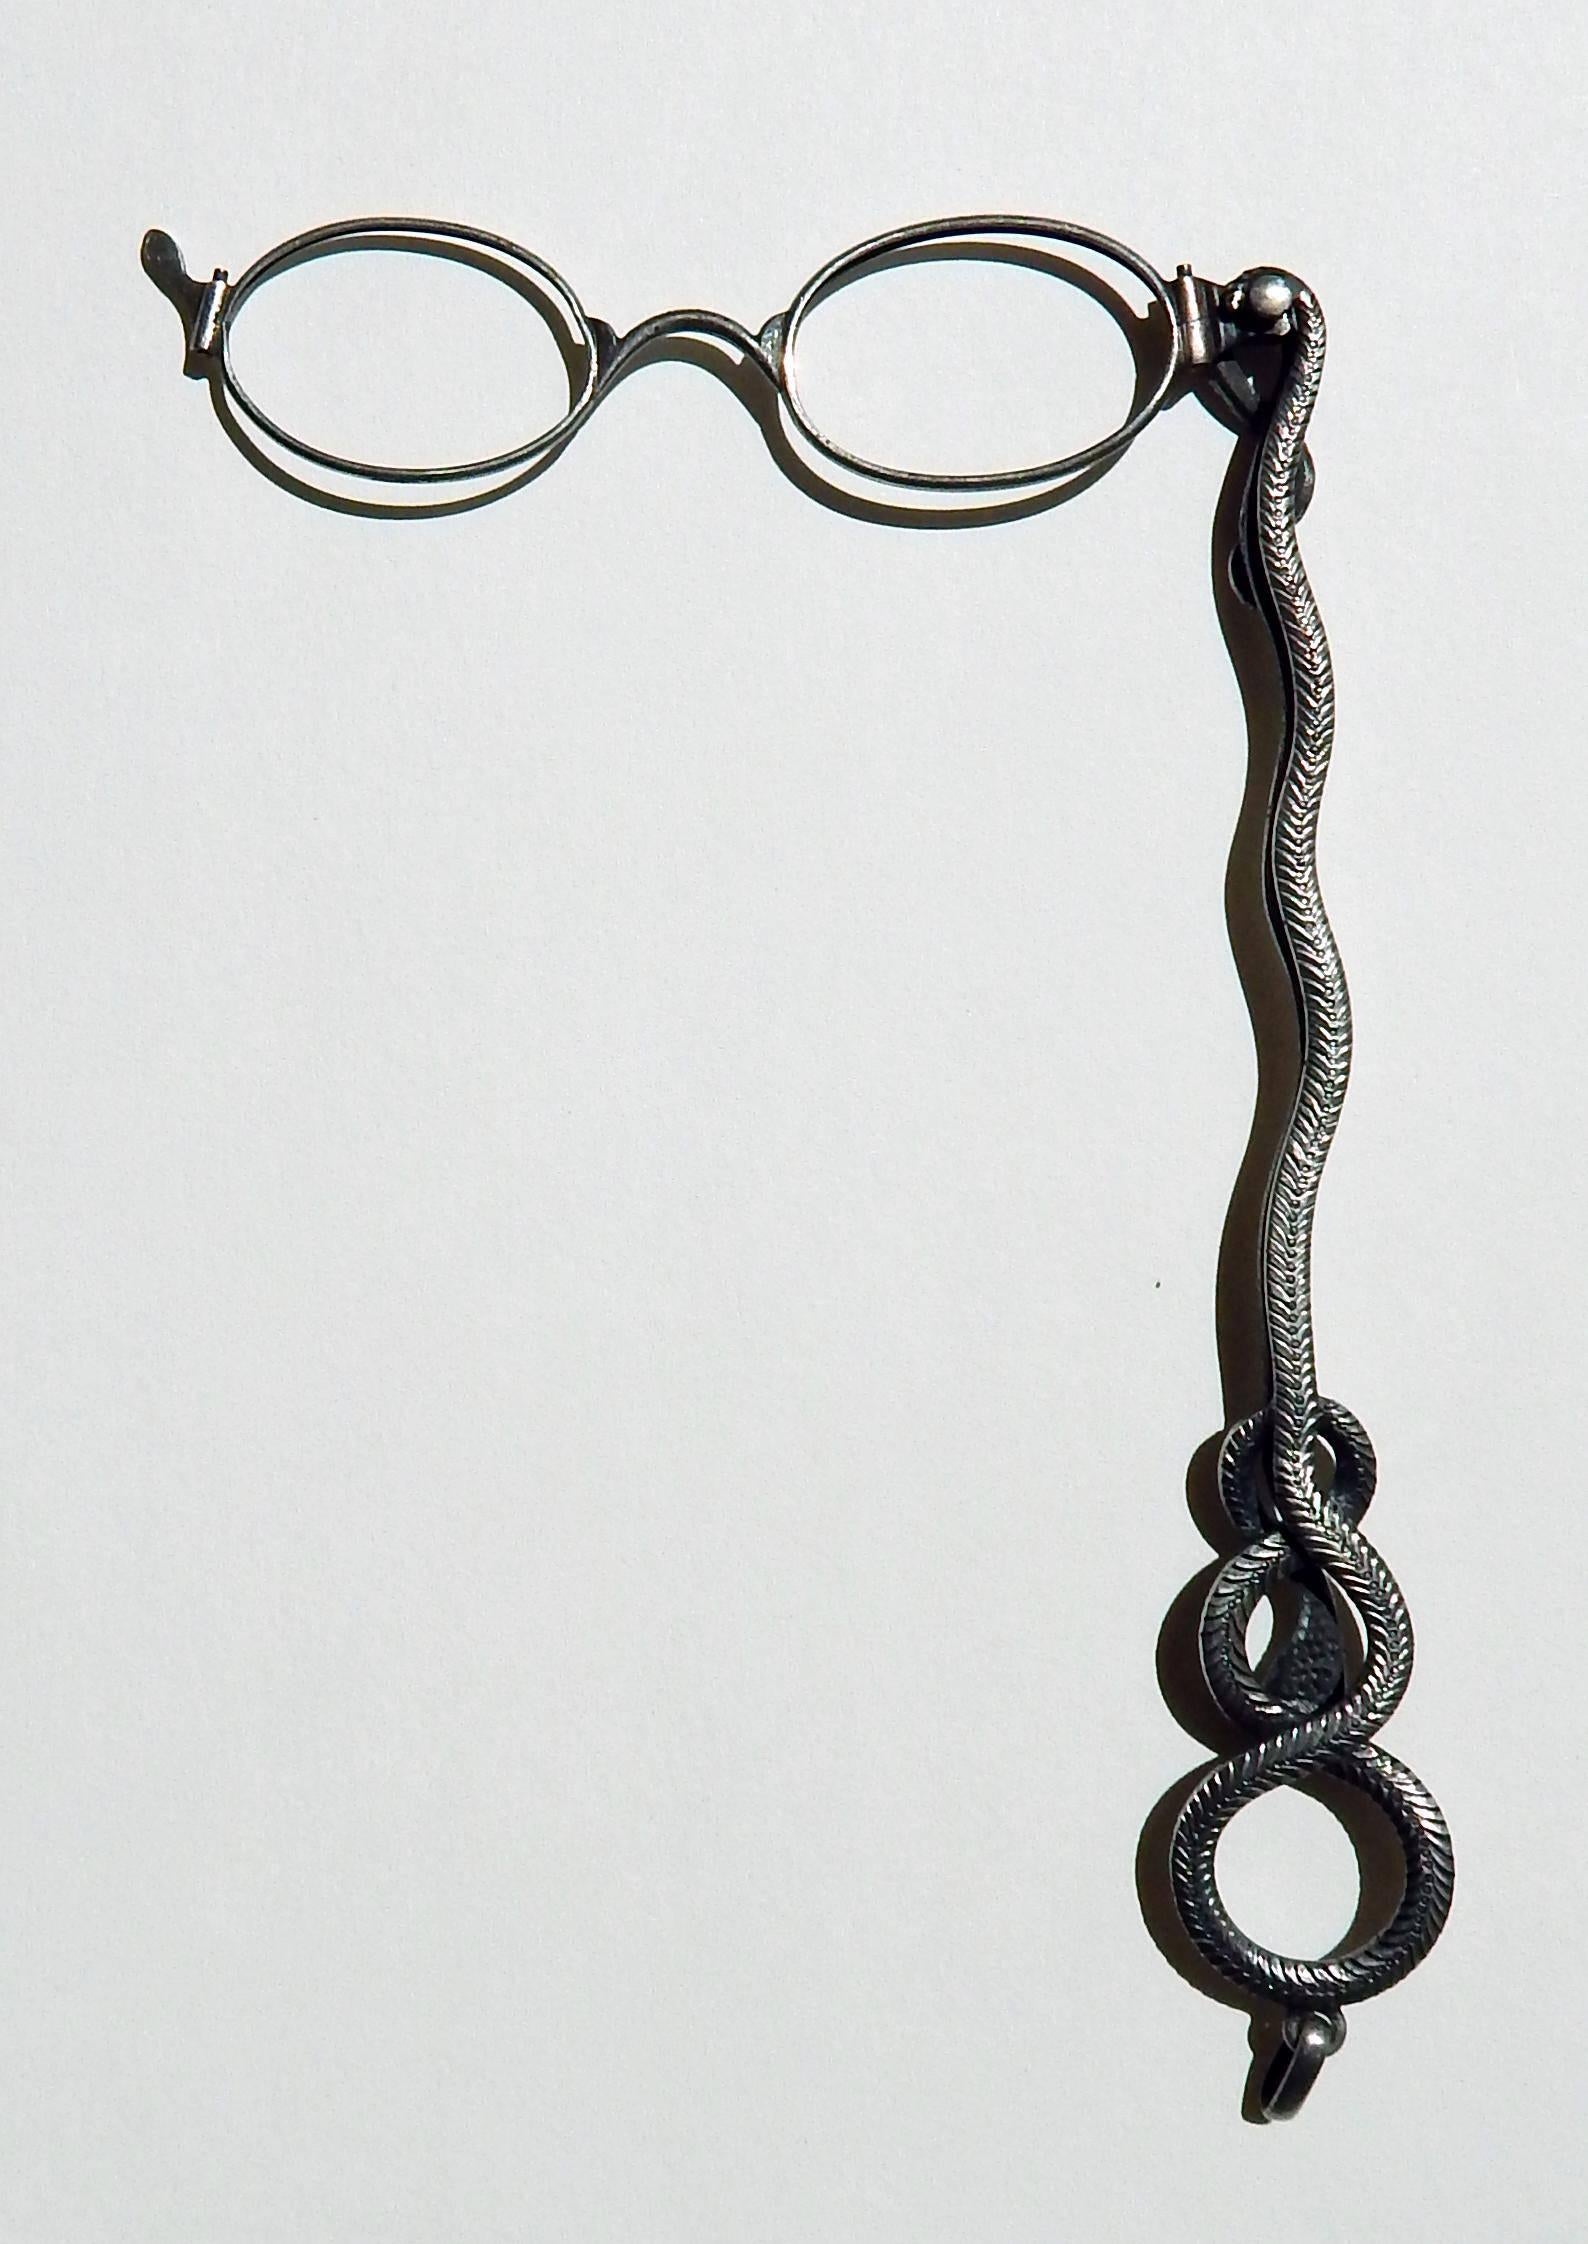 Spectacular .800 Silver folding lorgnette pendant with serpent design.
Faceted red stone or glass on the back of the serpent’s head.
Handle Measures: 7 inches long
Measures: 10 5/8